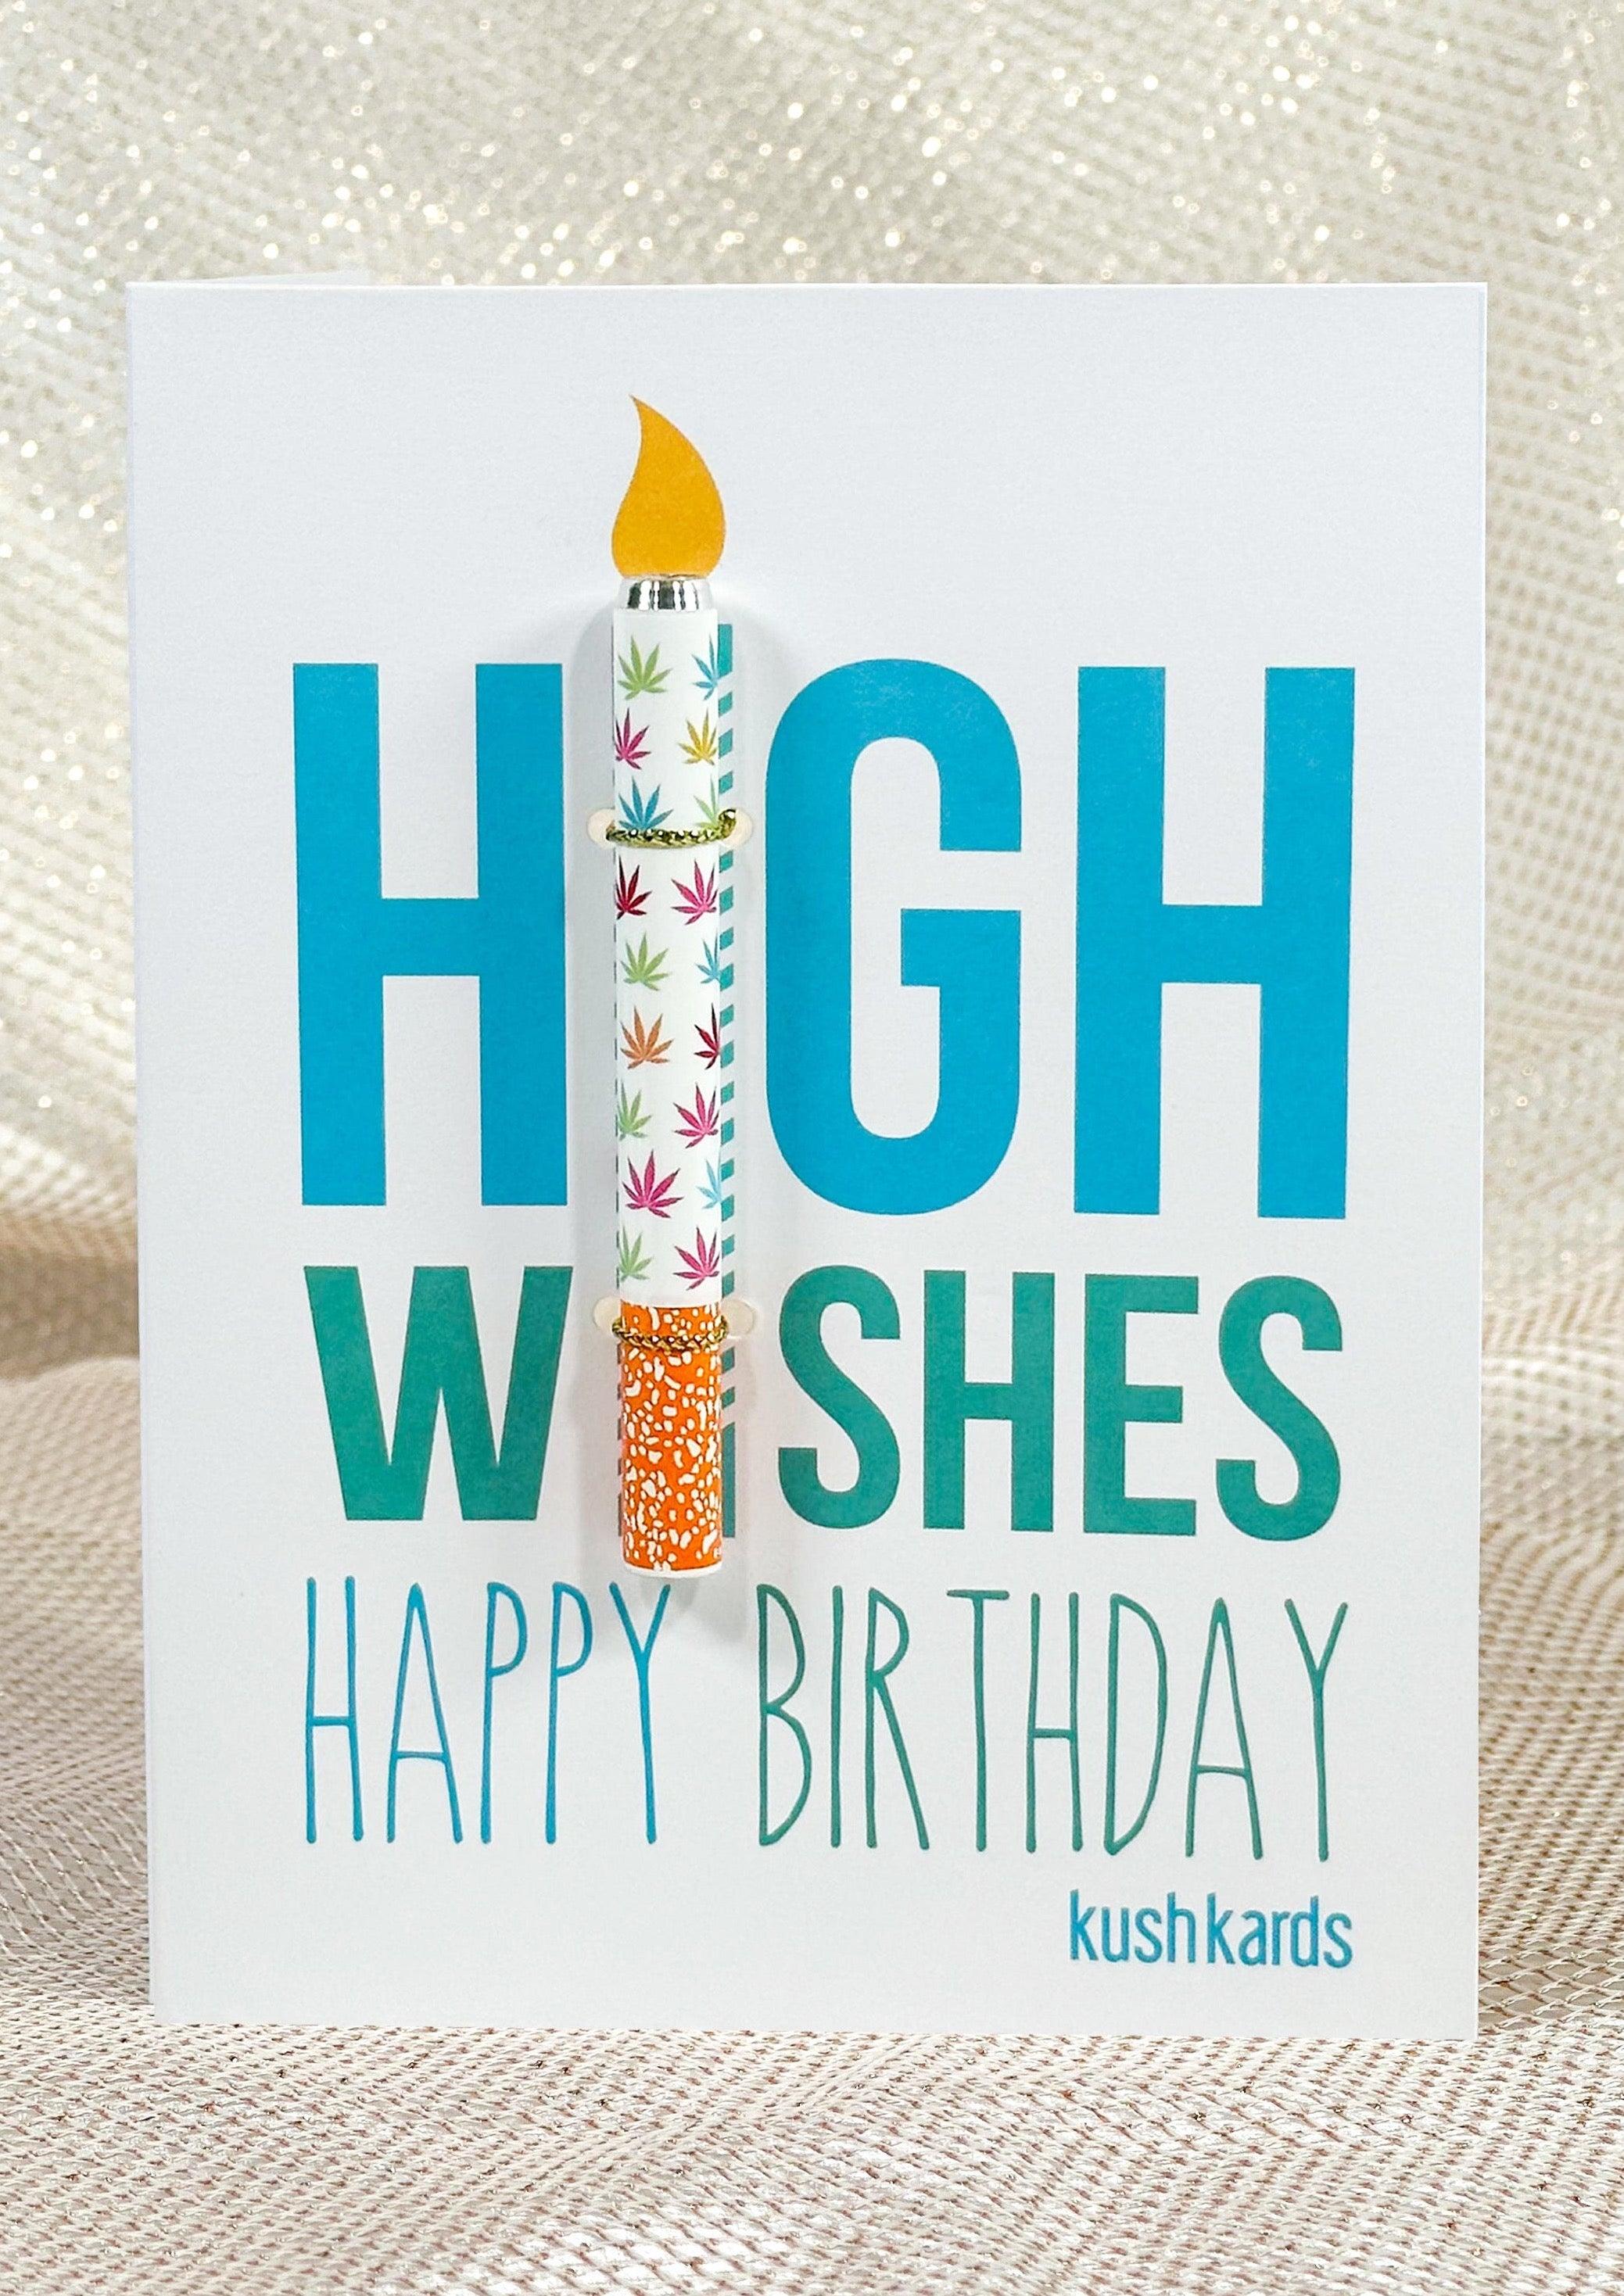 High Wishes Birthday KushKard with blue lettering and optional one-hitter pipe